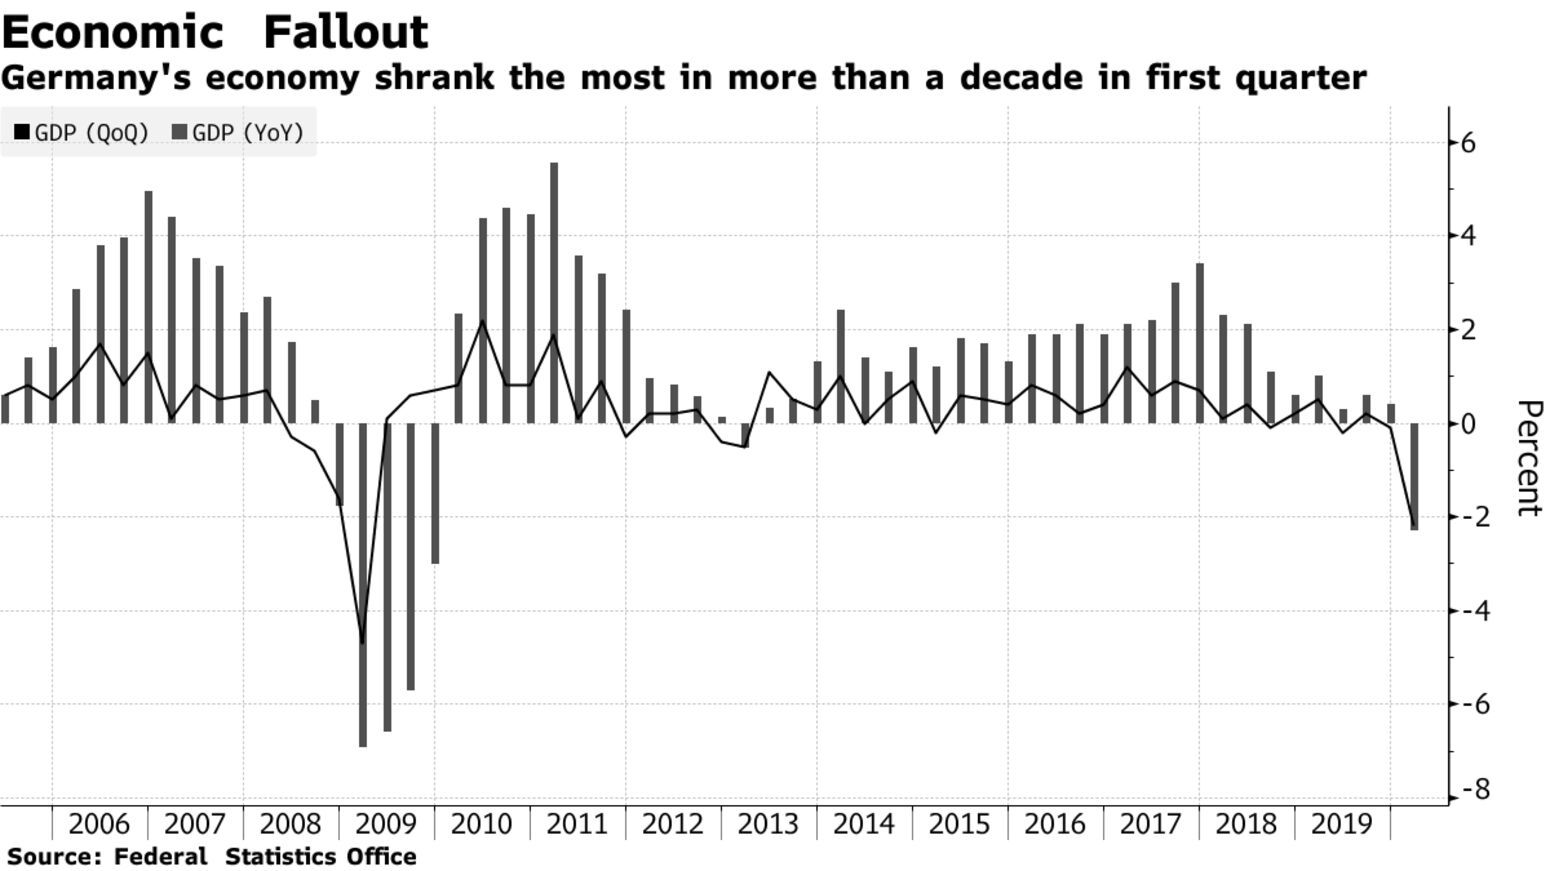 Germany's economy shrank the most in more than a decade in first quarter